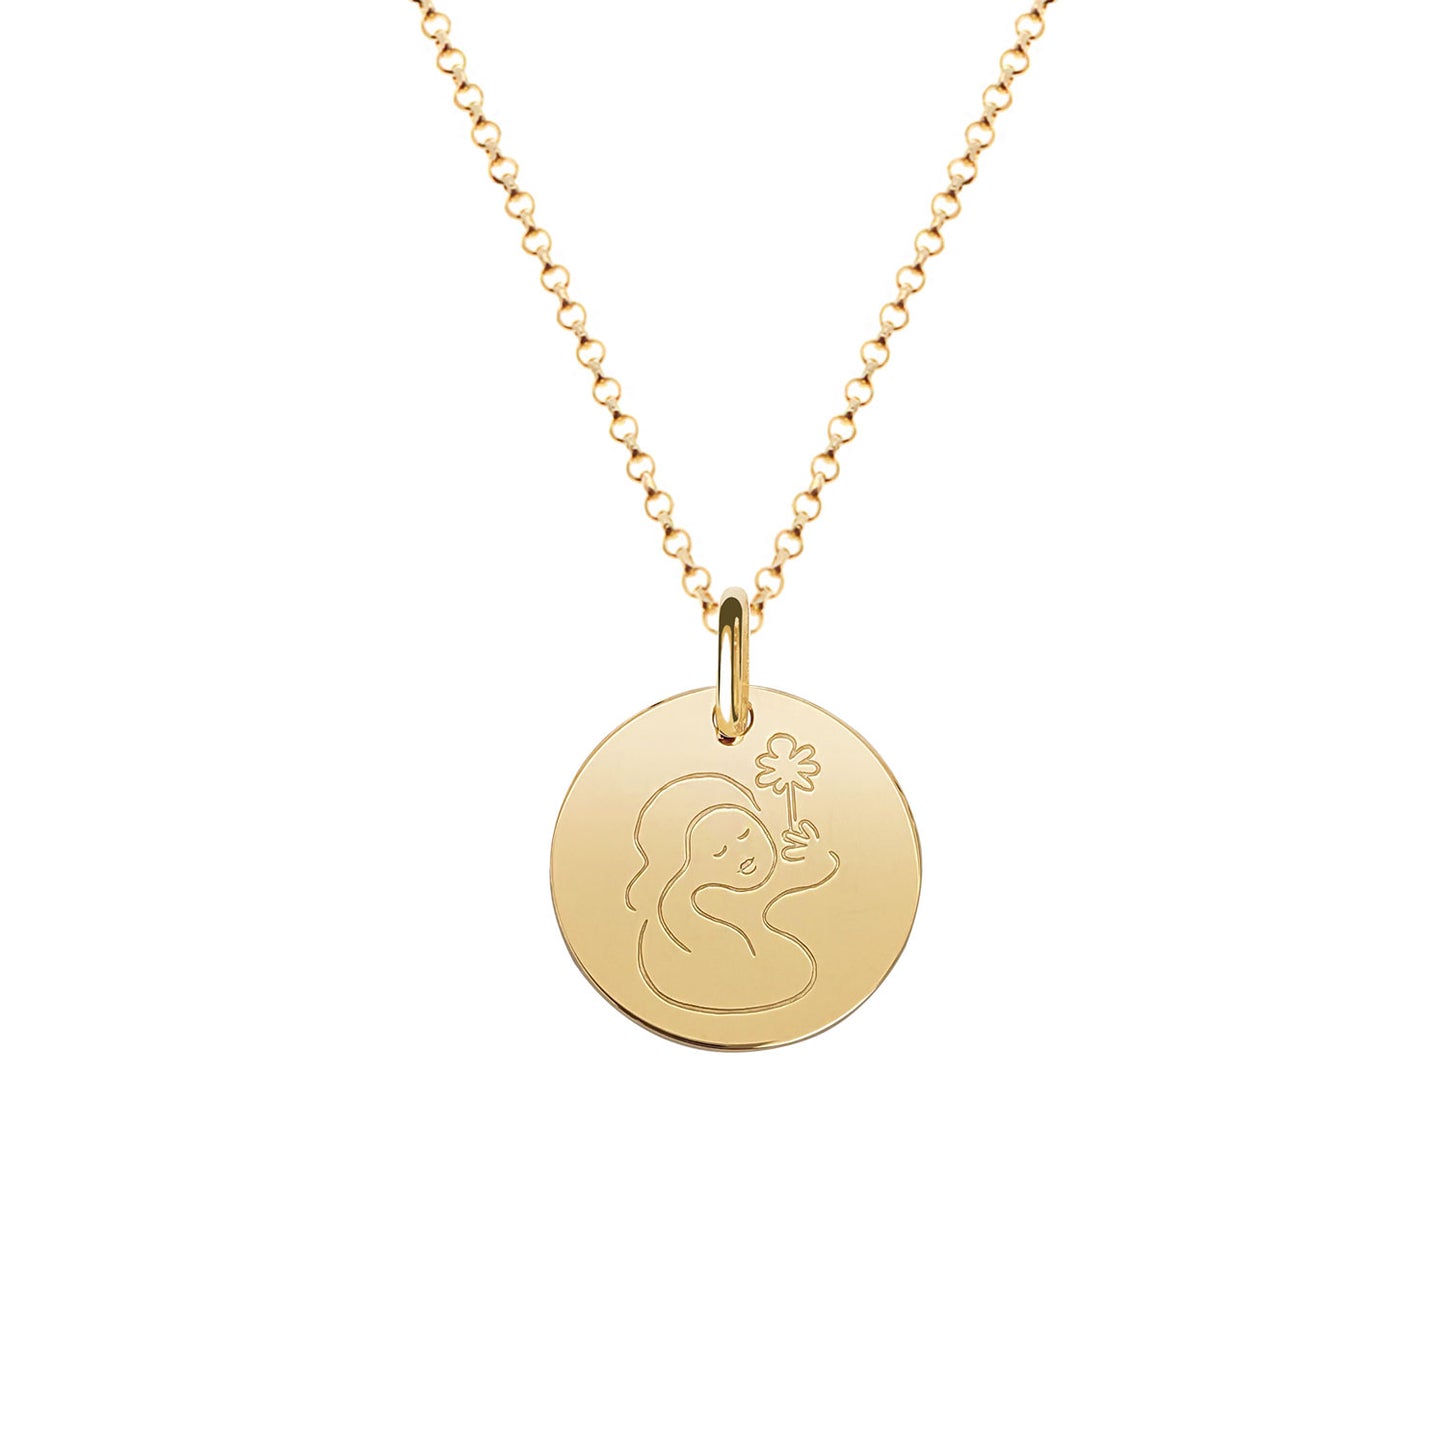 Muze 18k gold vermeil peace medal necklace, art inspired jewelry, dainty talisman symbol of protection, peace and serenity.Meaningful sentimental gift perfect for wife girlfriend or as friendship present